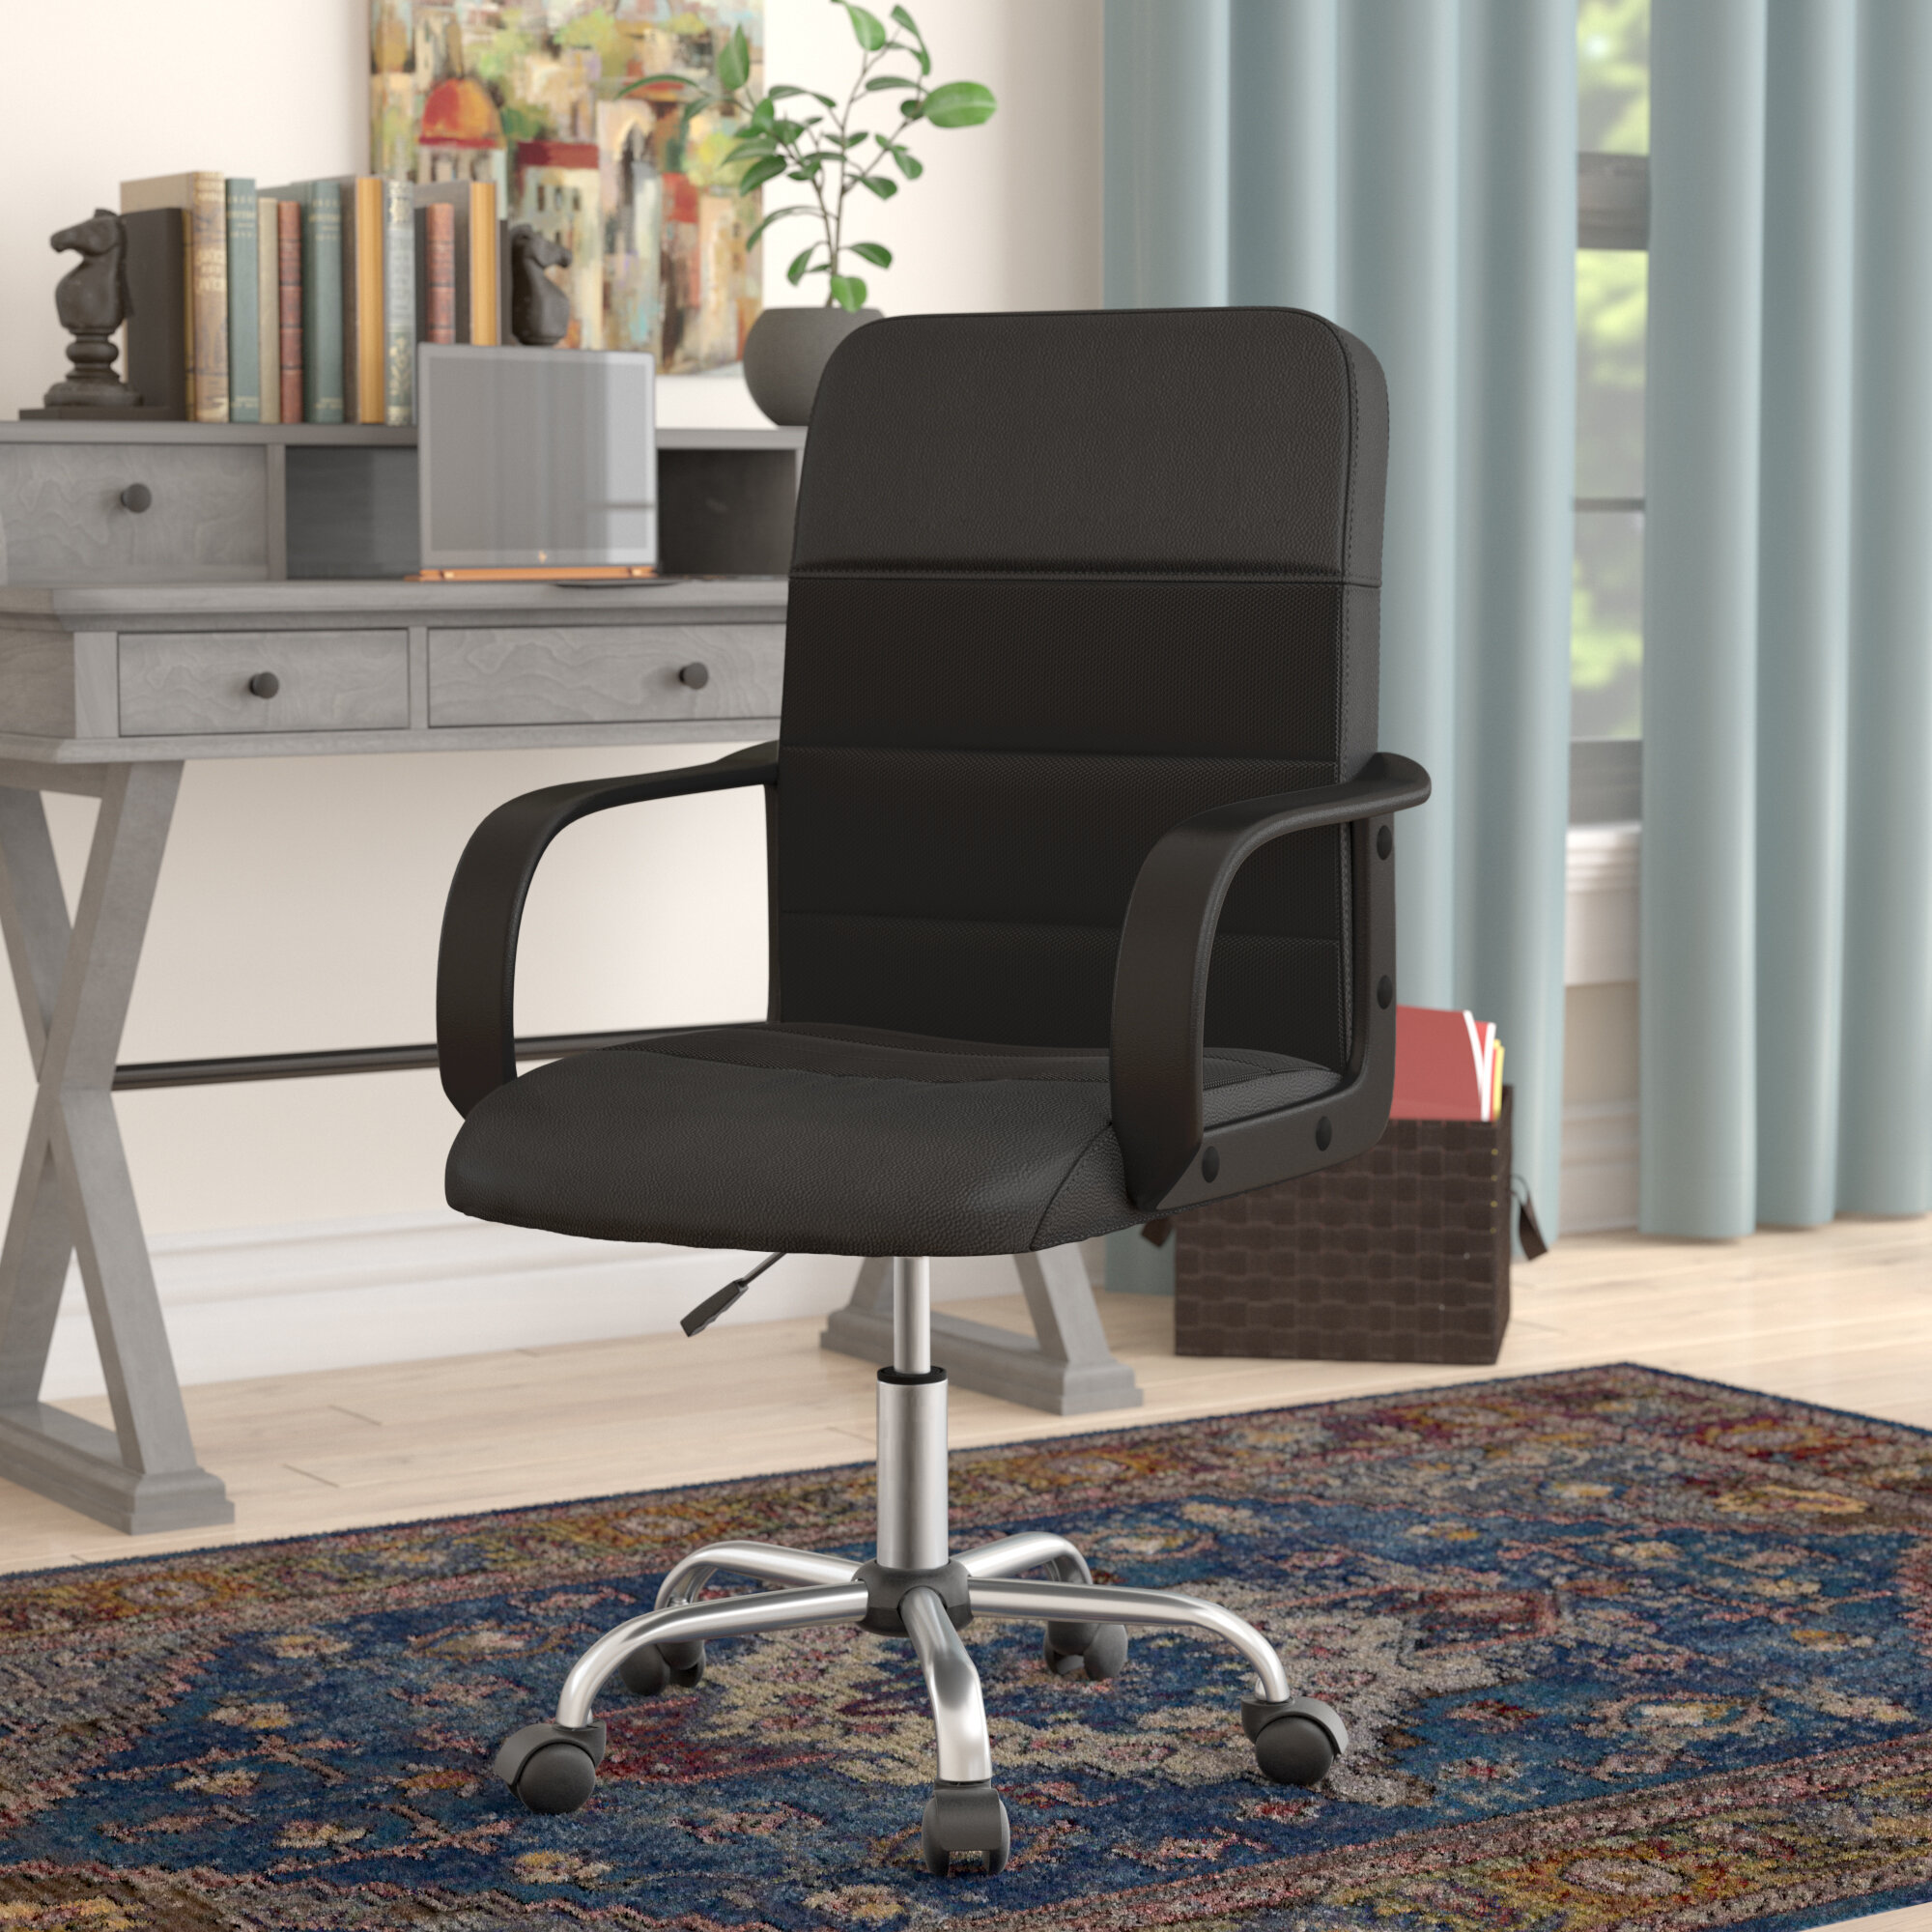 Black Mesh Office Chair Computer Middle Back Task Swivel Seat Ergonomic Chair 